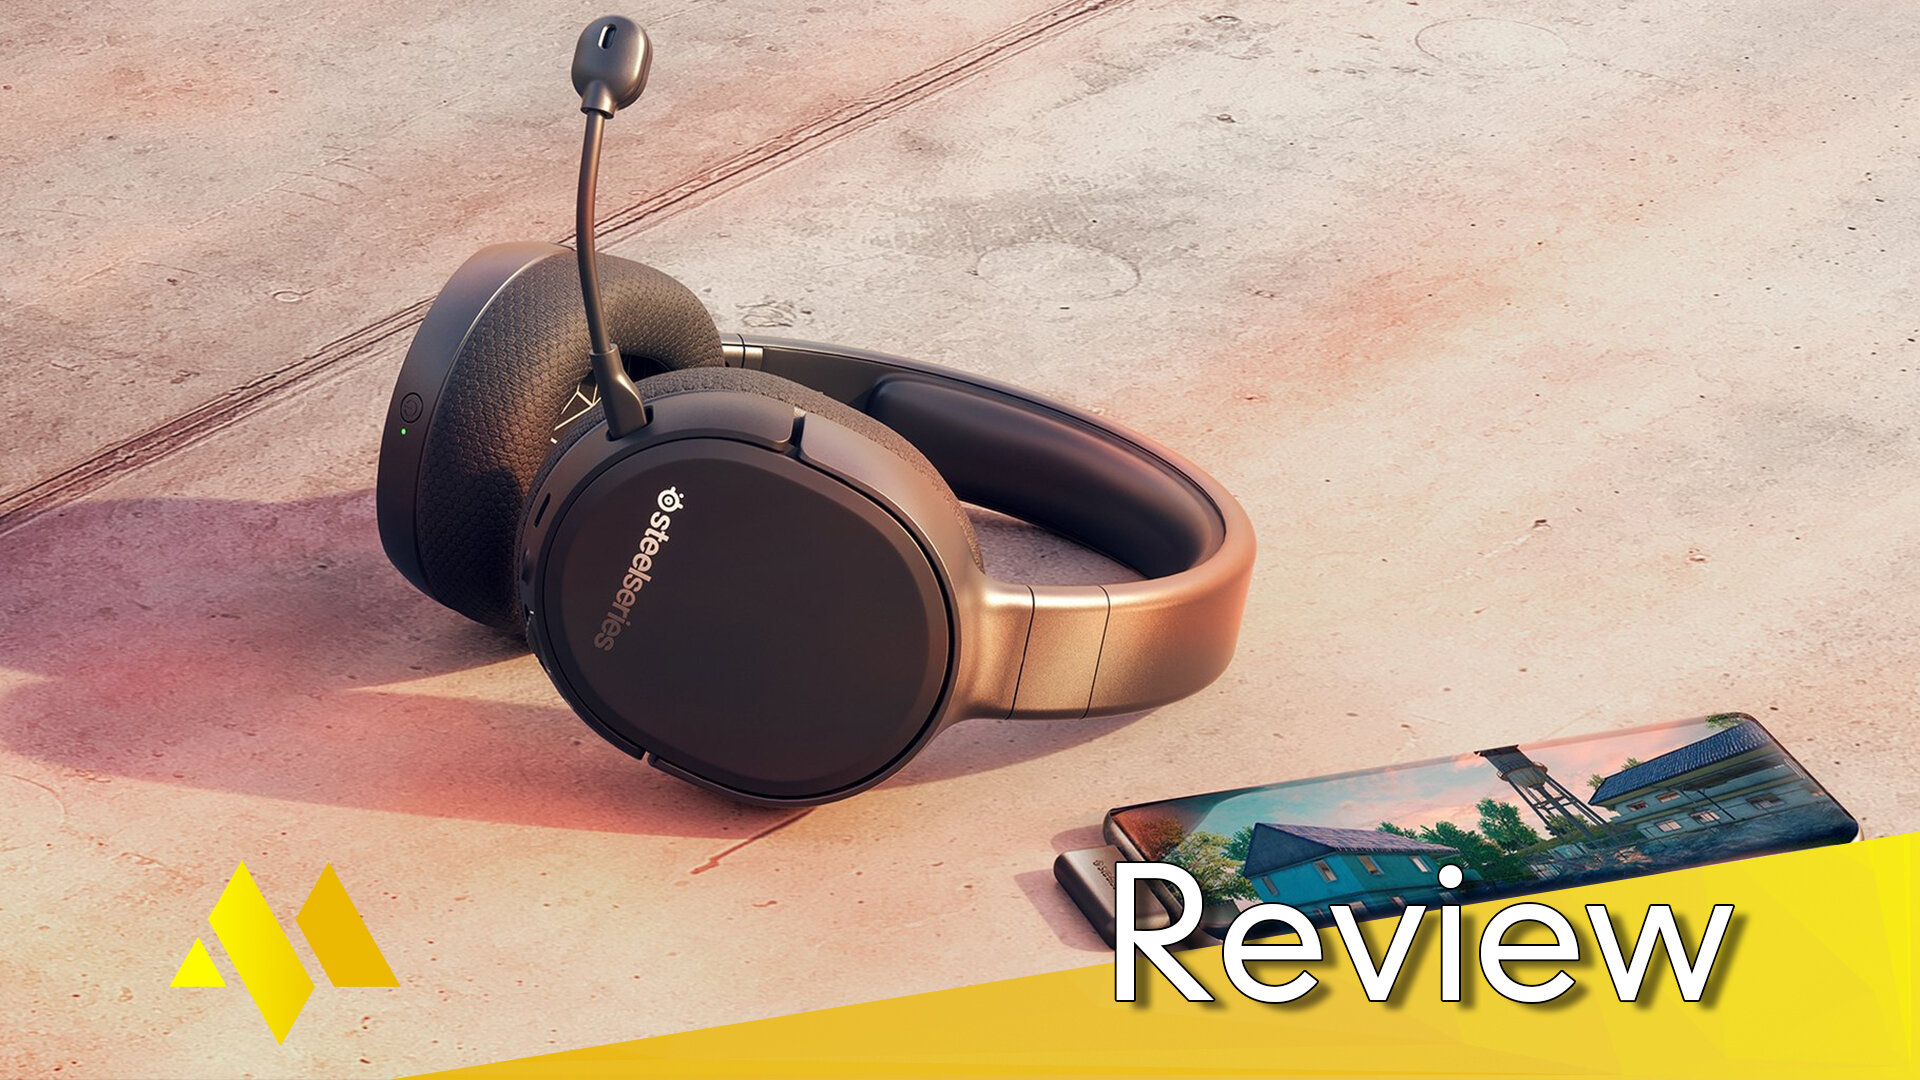 SteelSeries Arctis 1 Review - Still Worth it? 